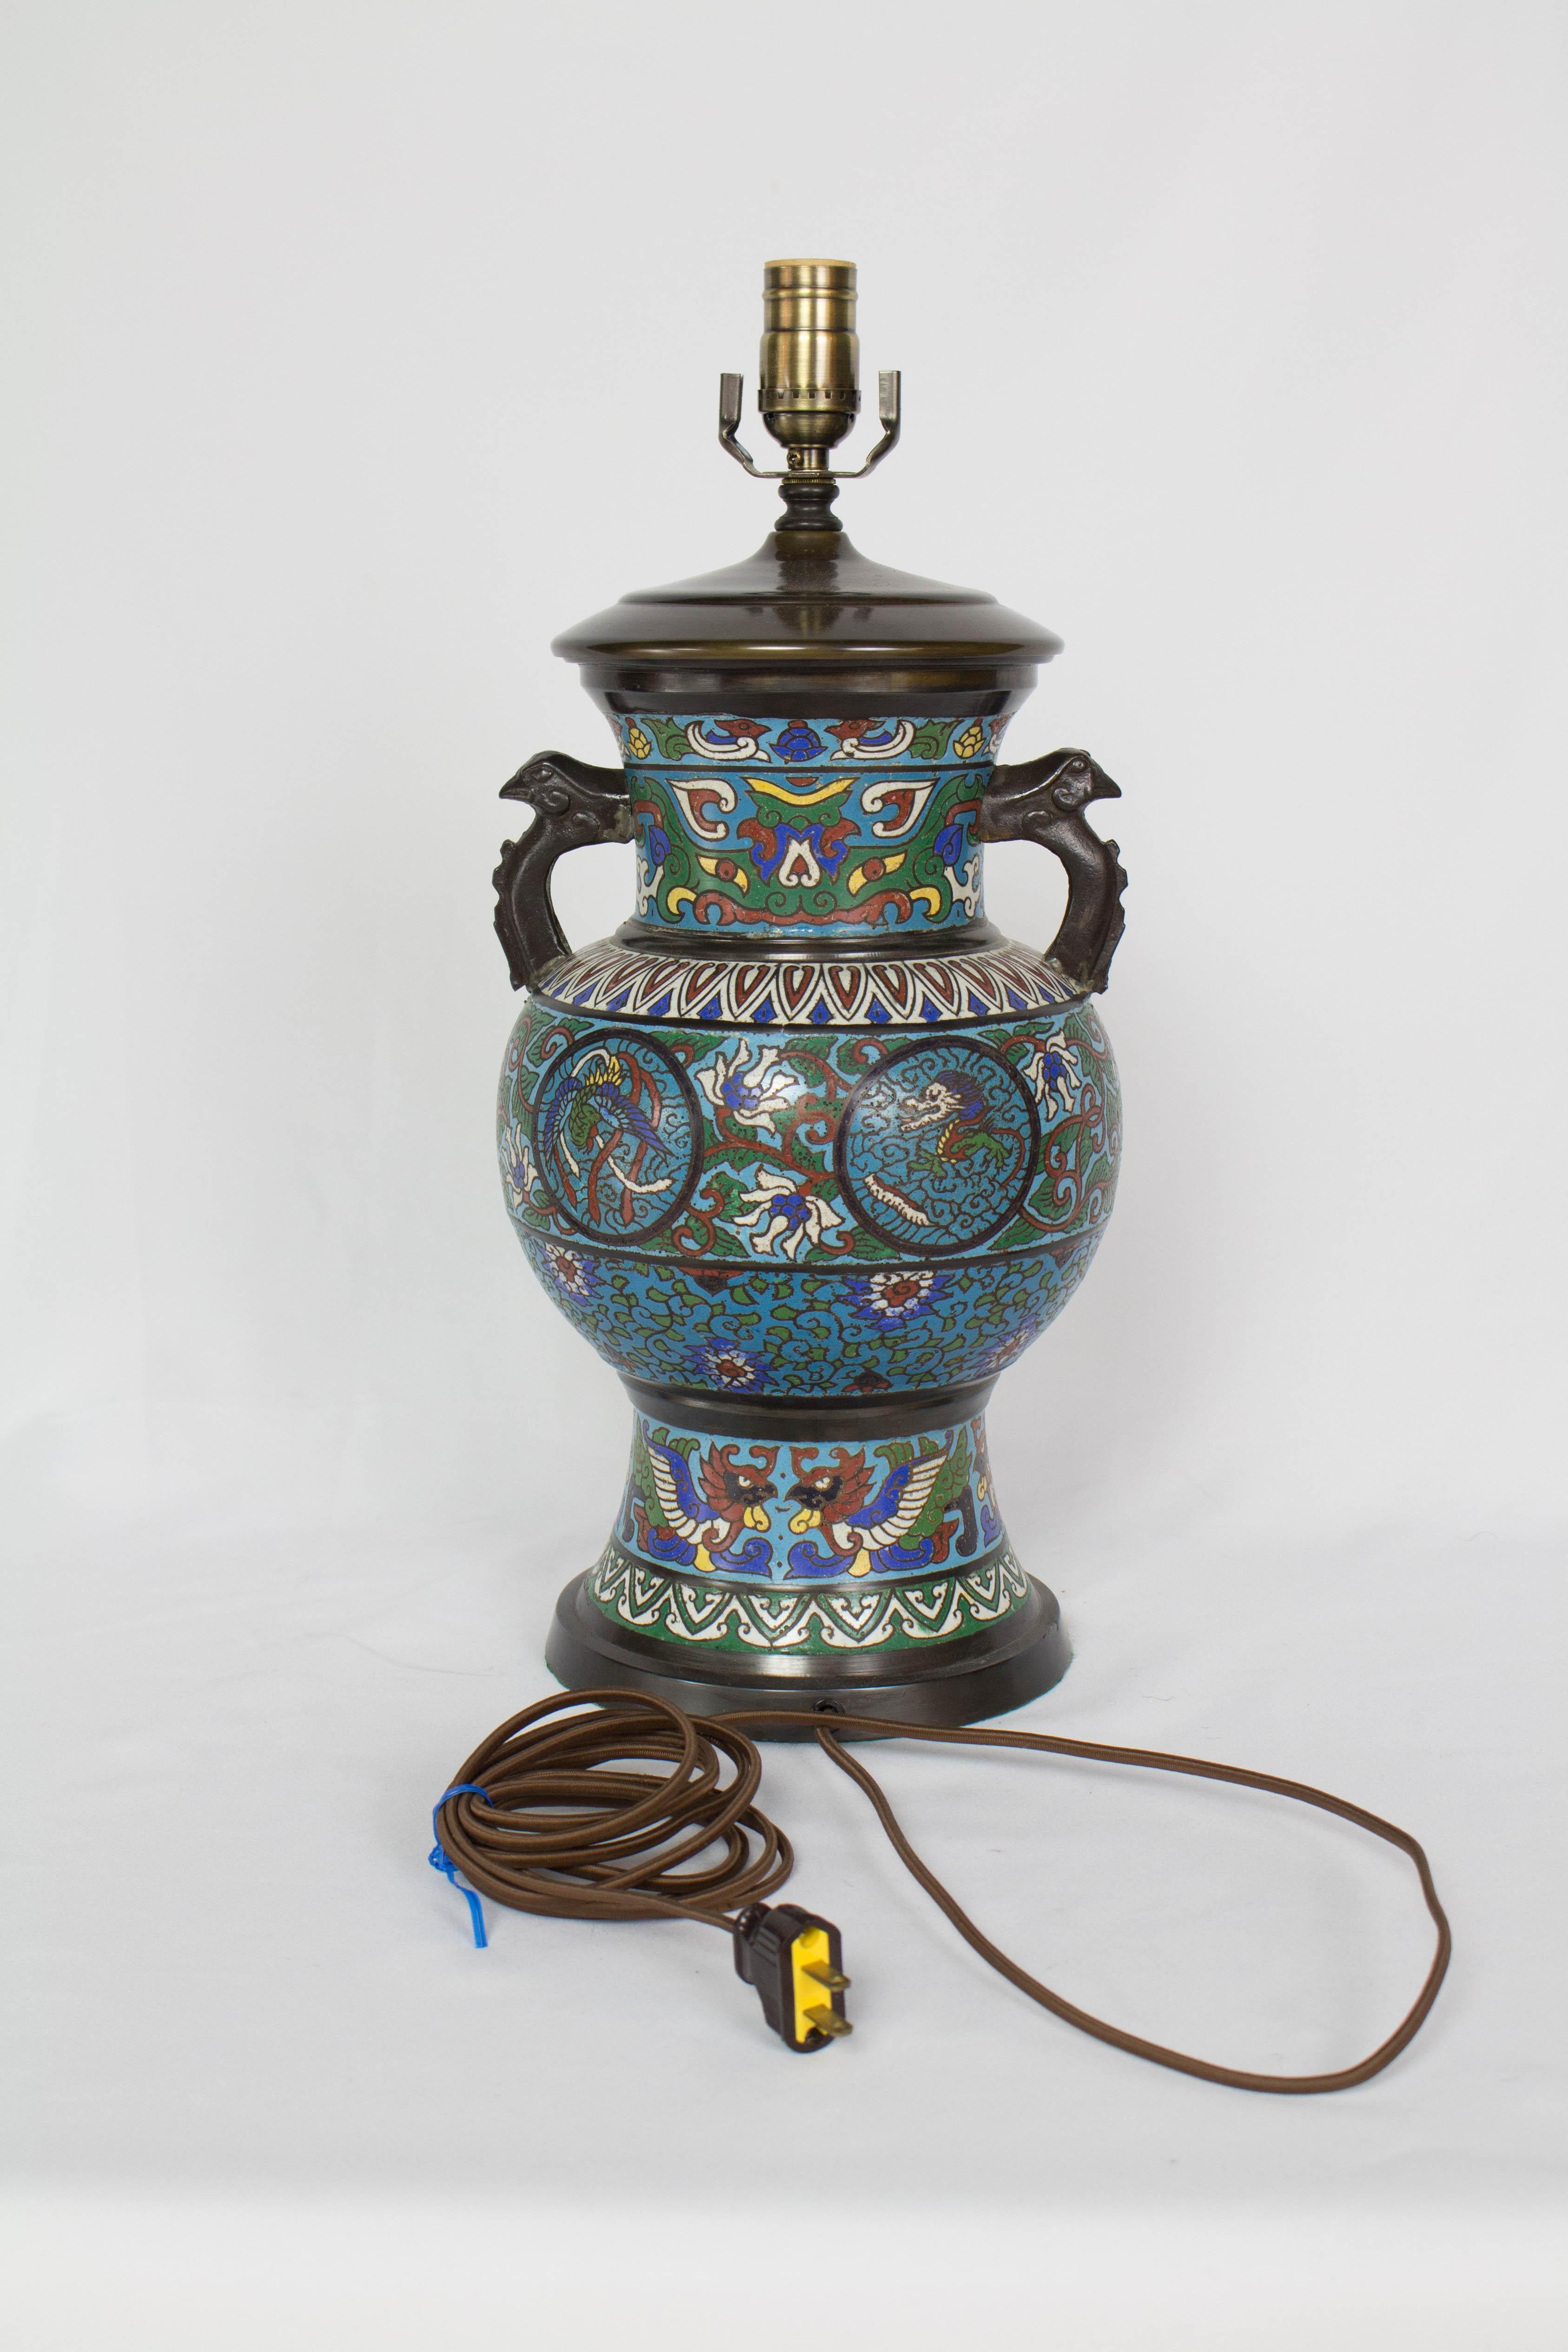 Champleve table lamp with Dragon Design, Two Handles. brightly saturated blue, red and green enamel in a bronze base.  